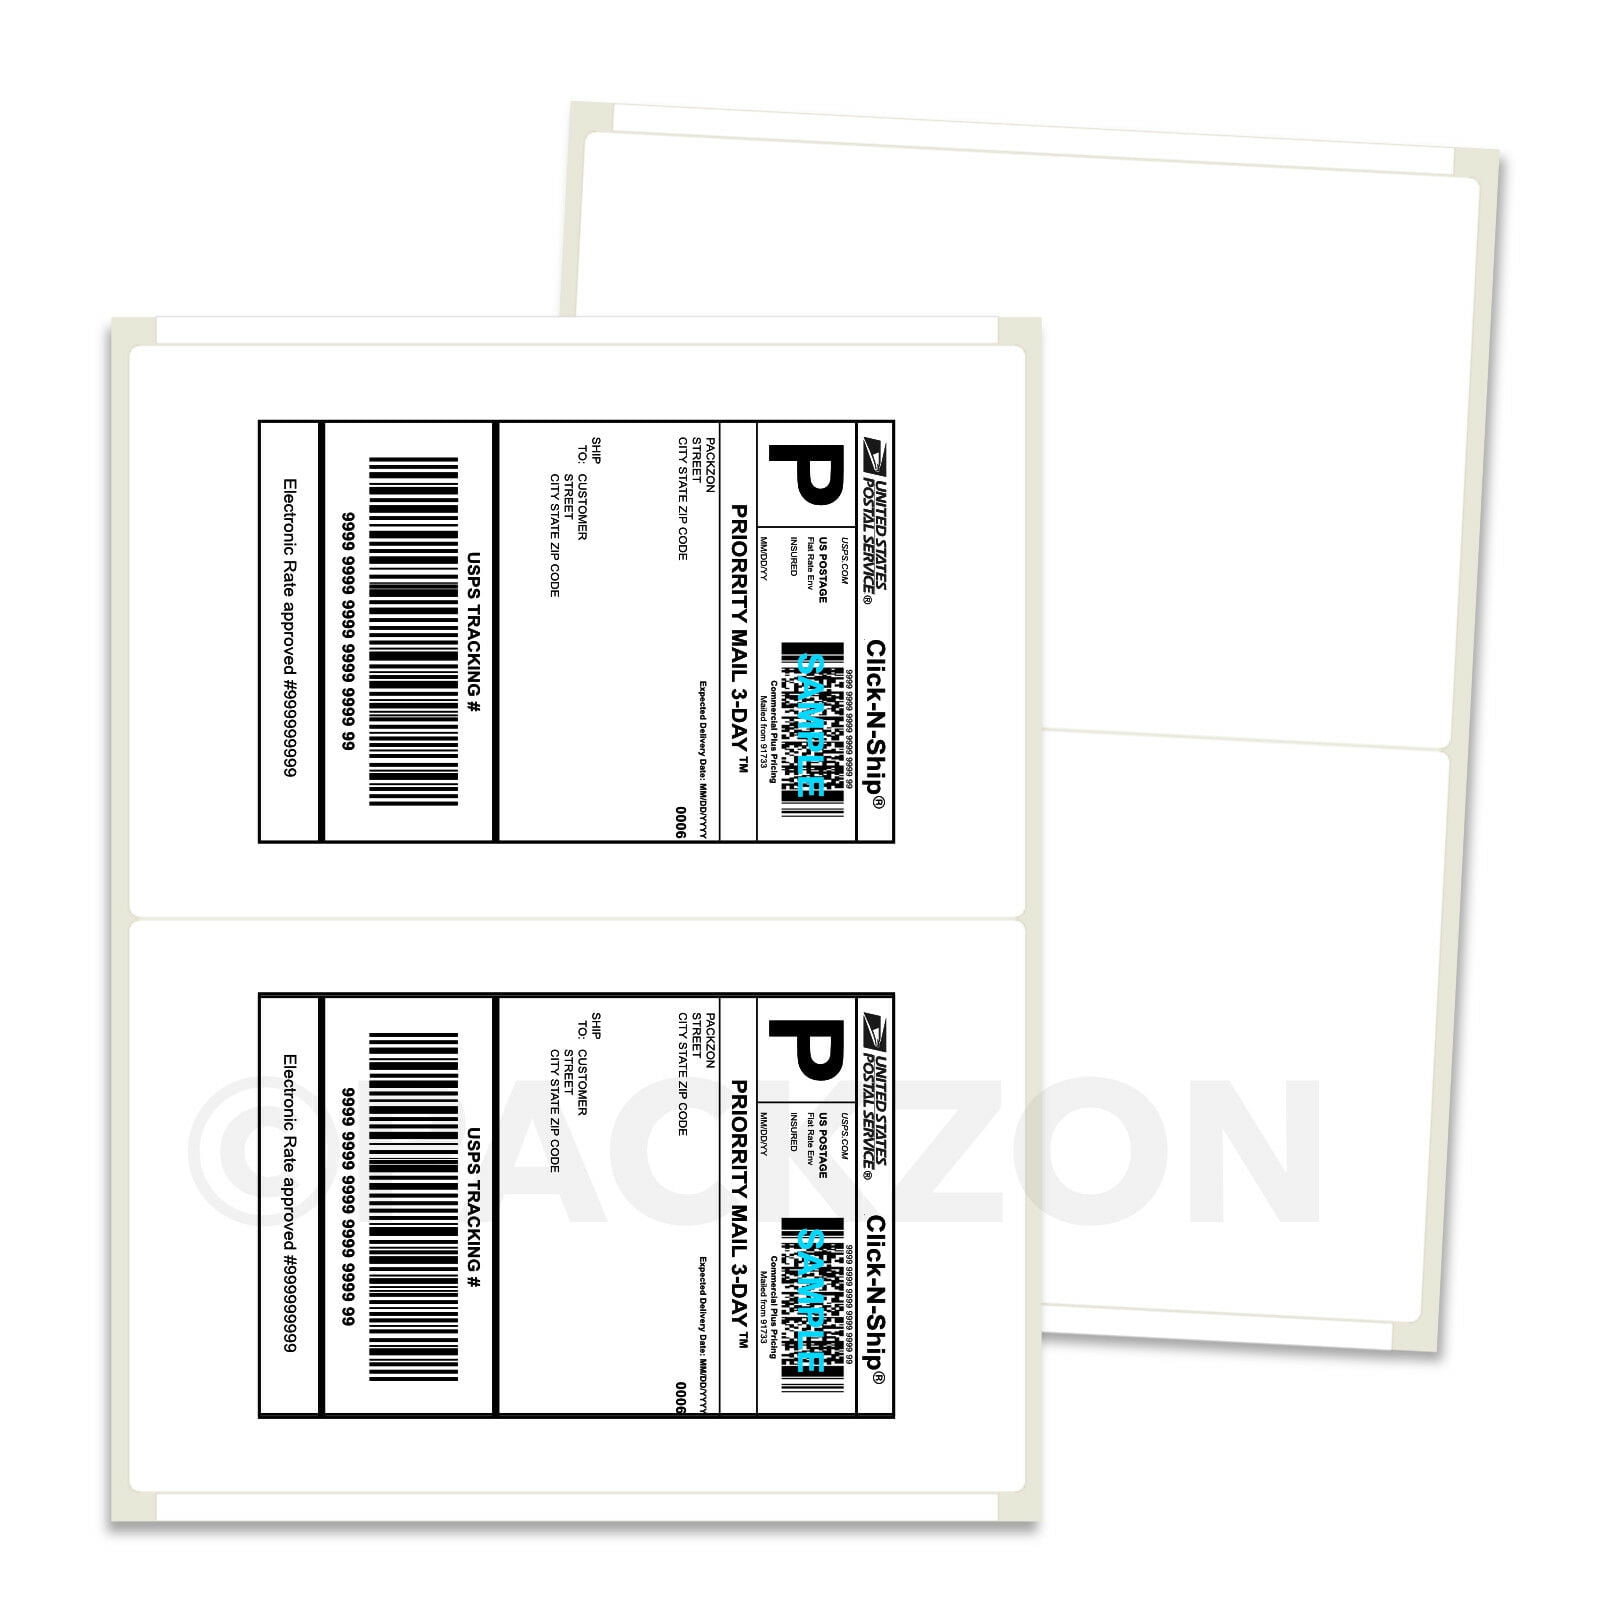 2000 Quality Round Corner Shipping Labels 2 Per Sheet 8.5" x 5.5" 